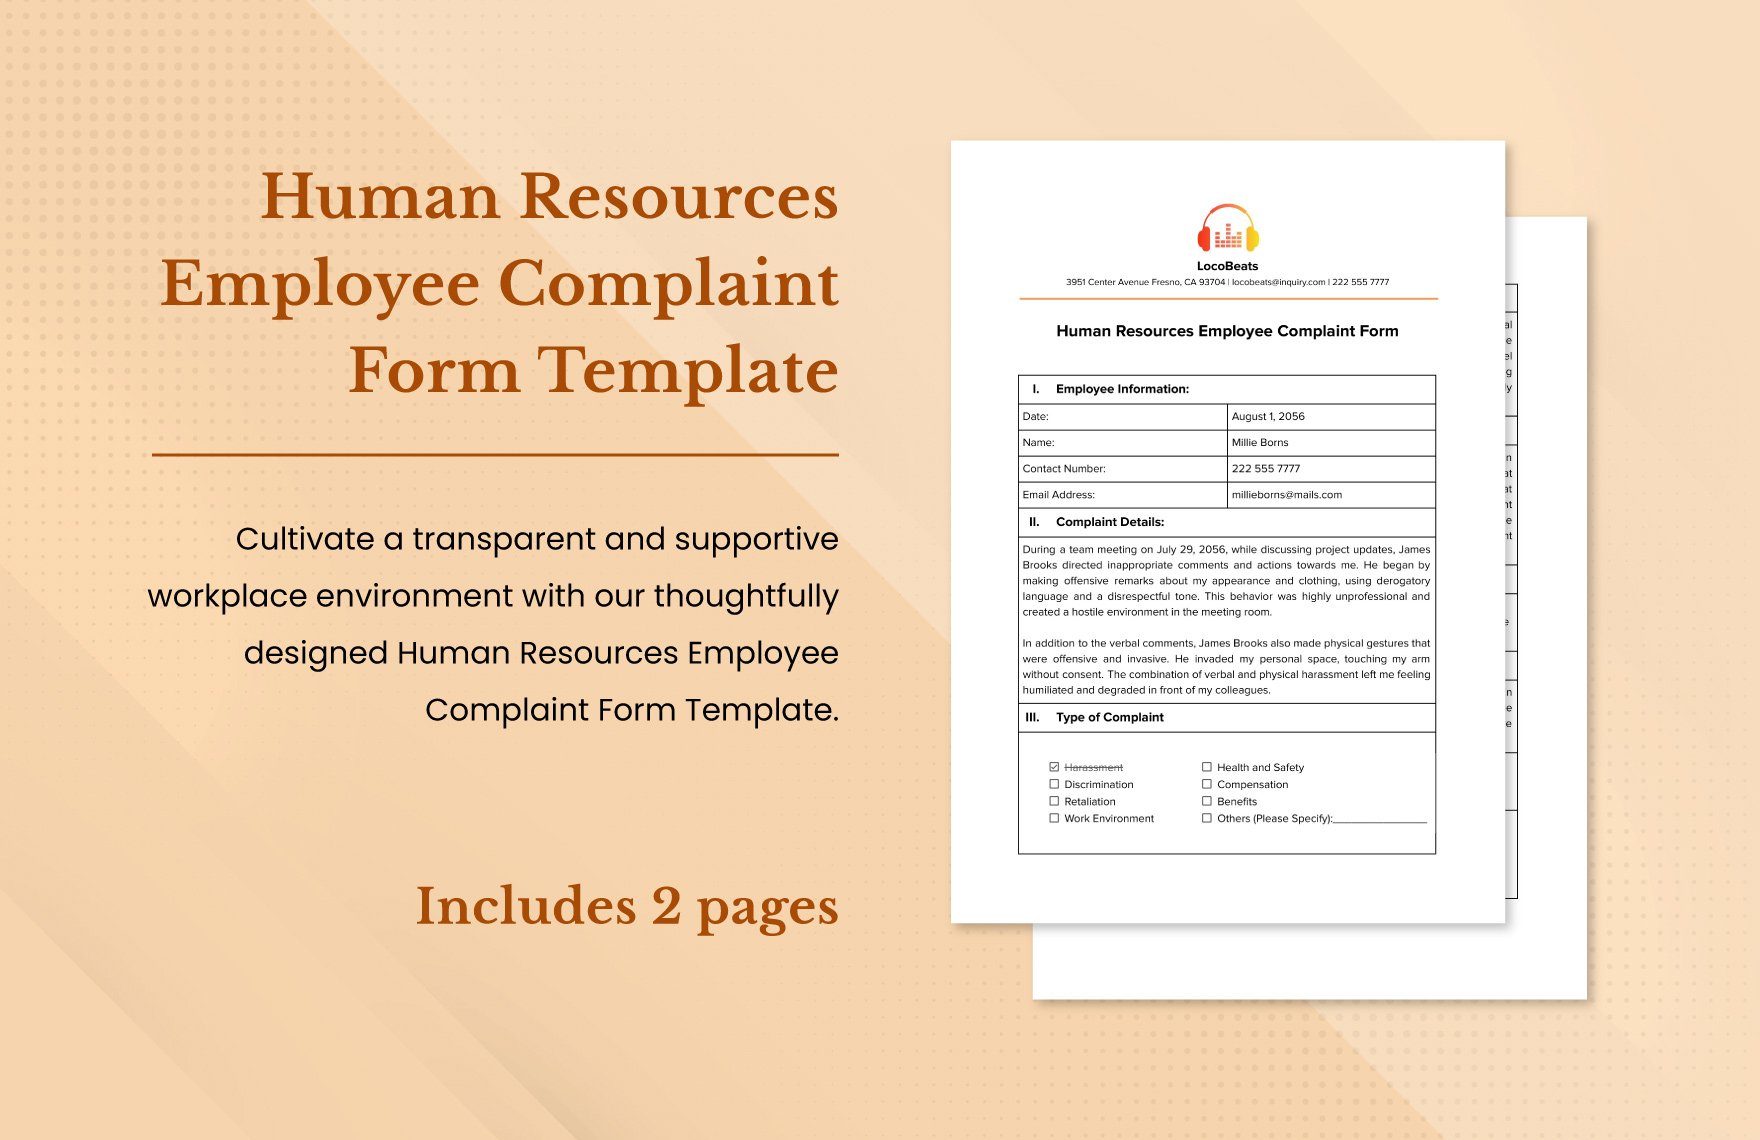 Human Resources Employee Complaint Form Template